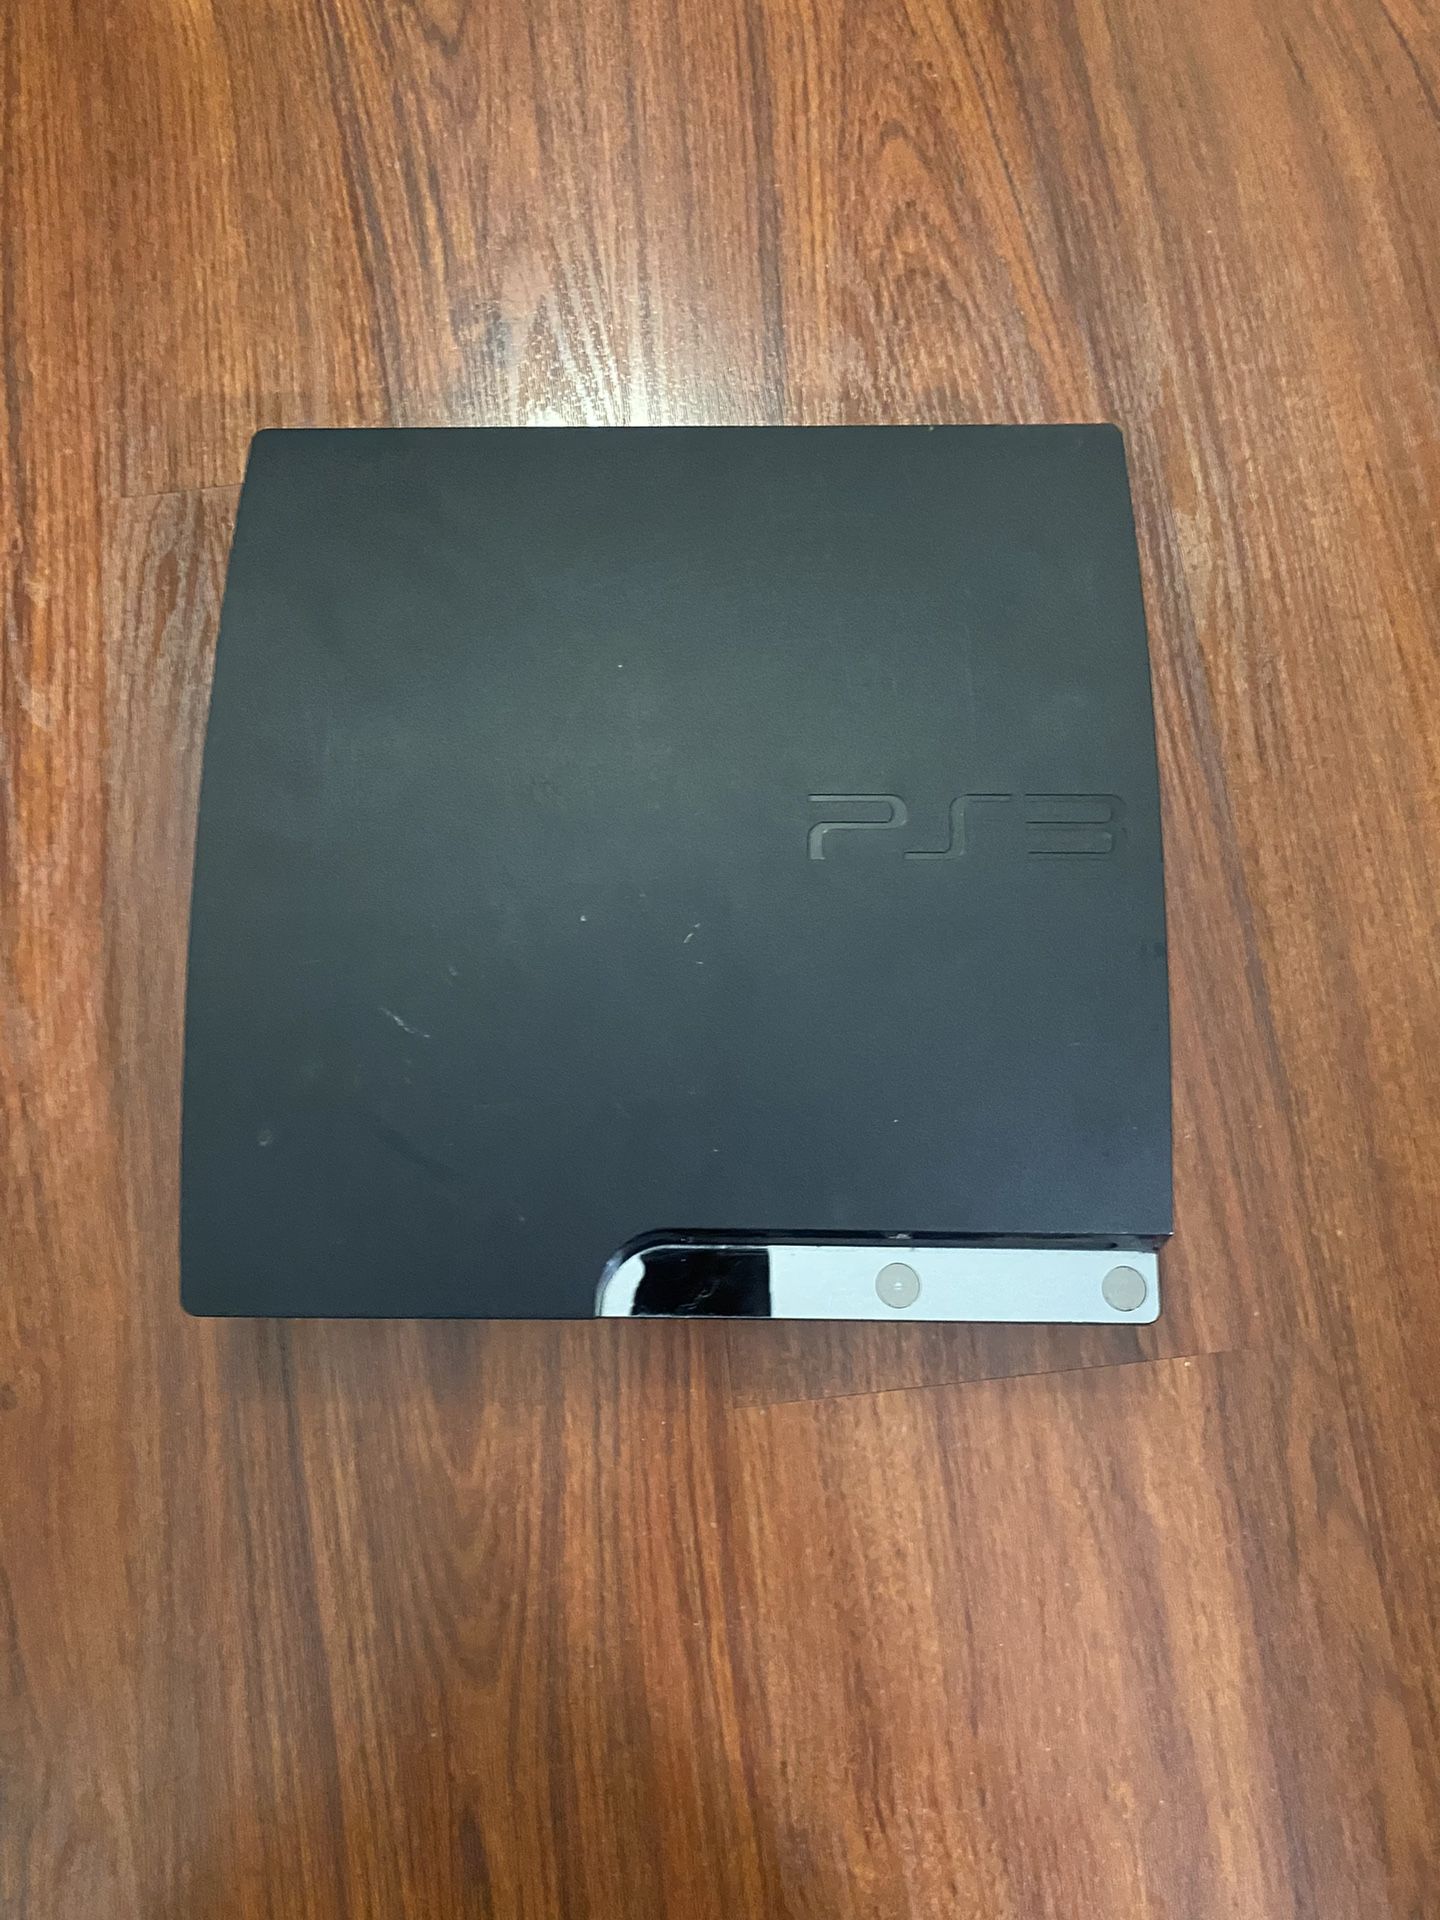 Ps3 Console Only